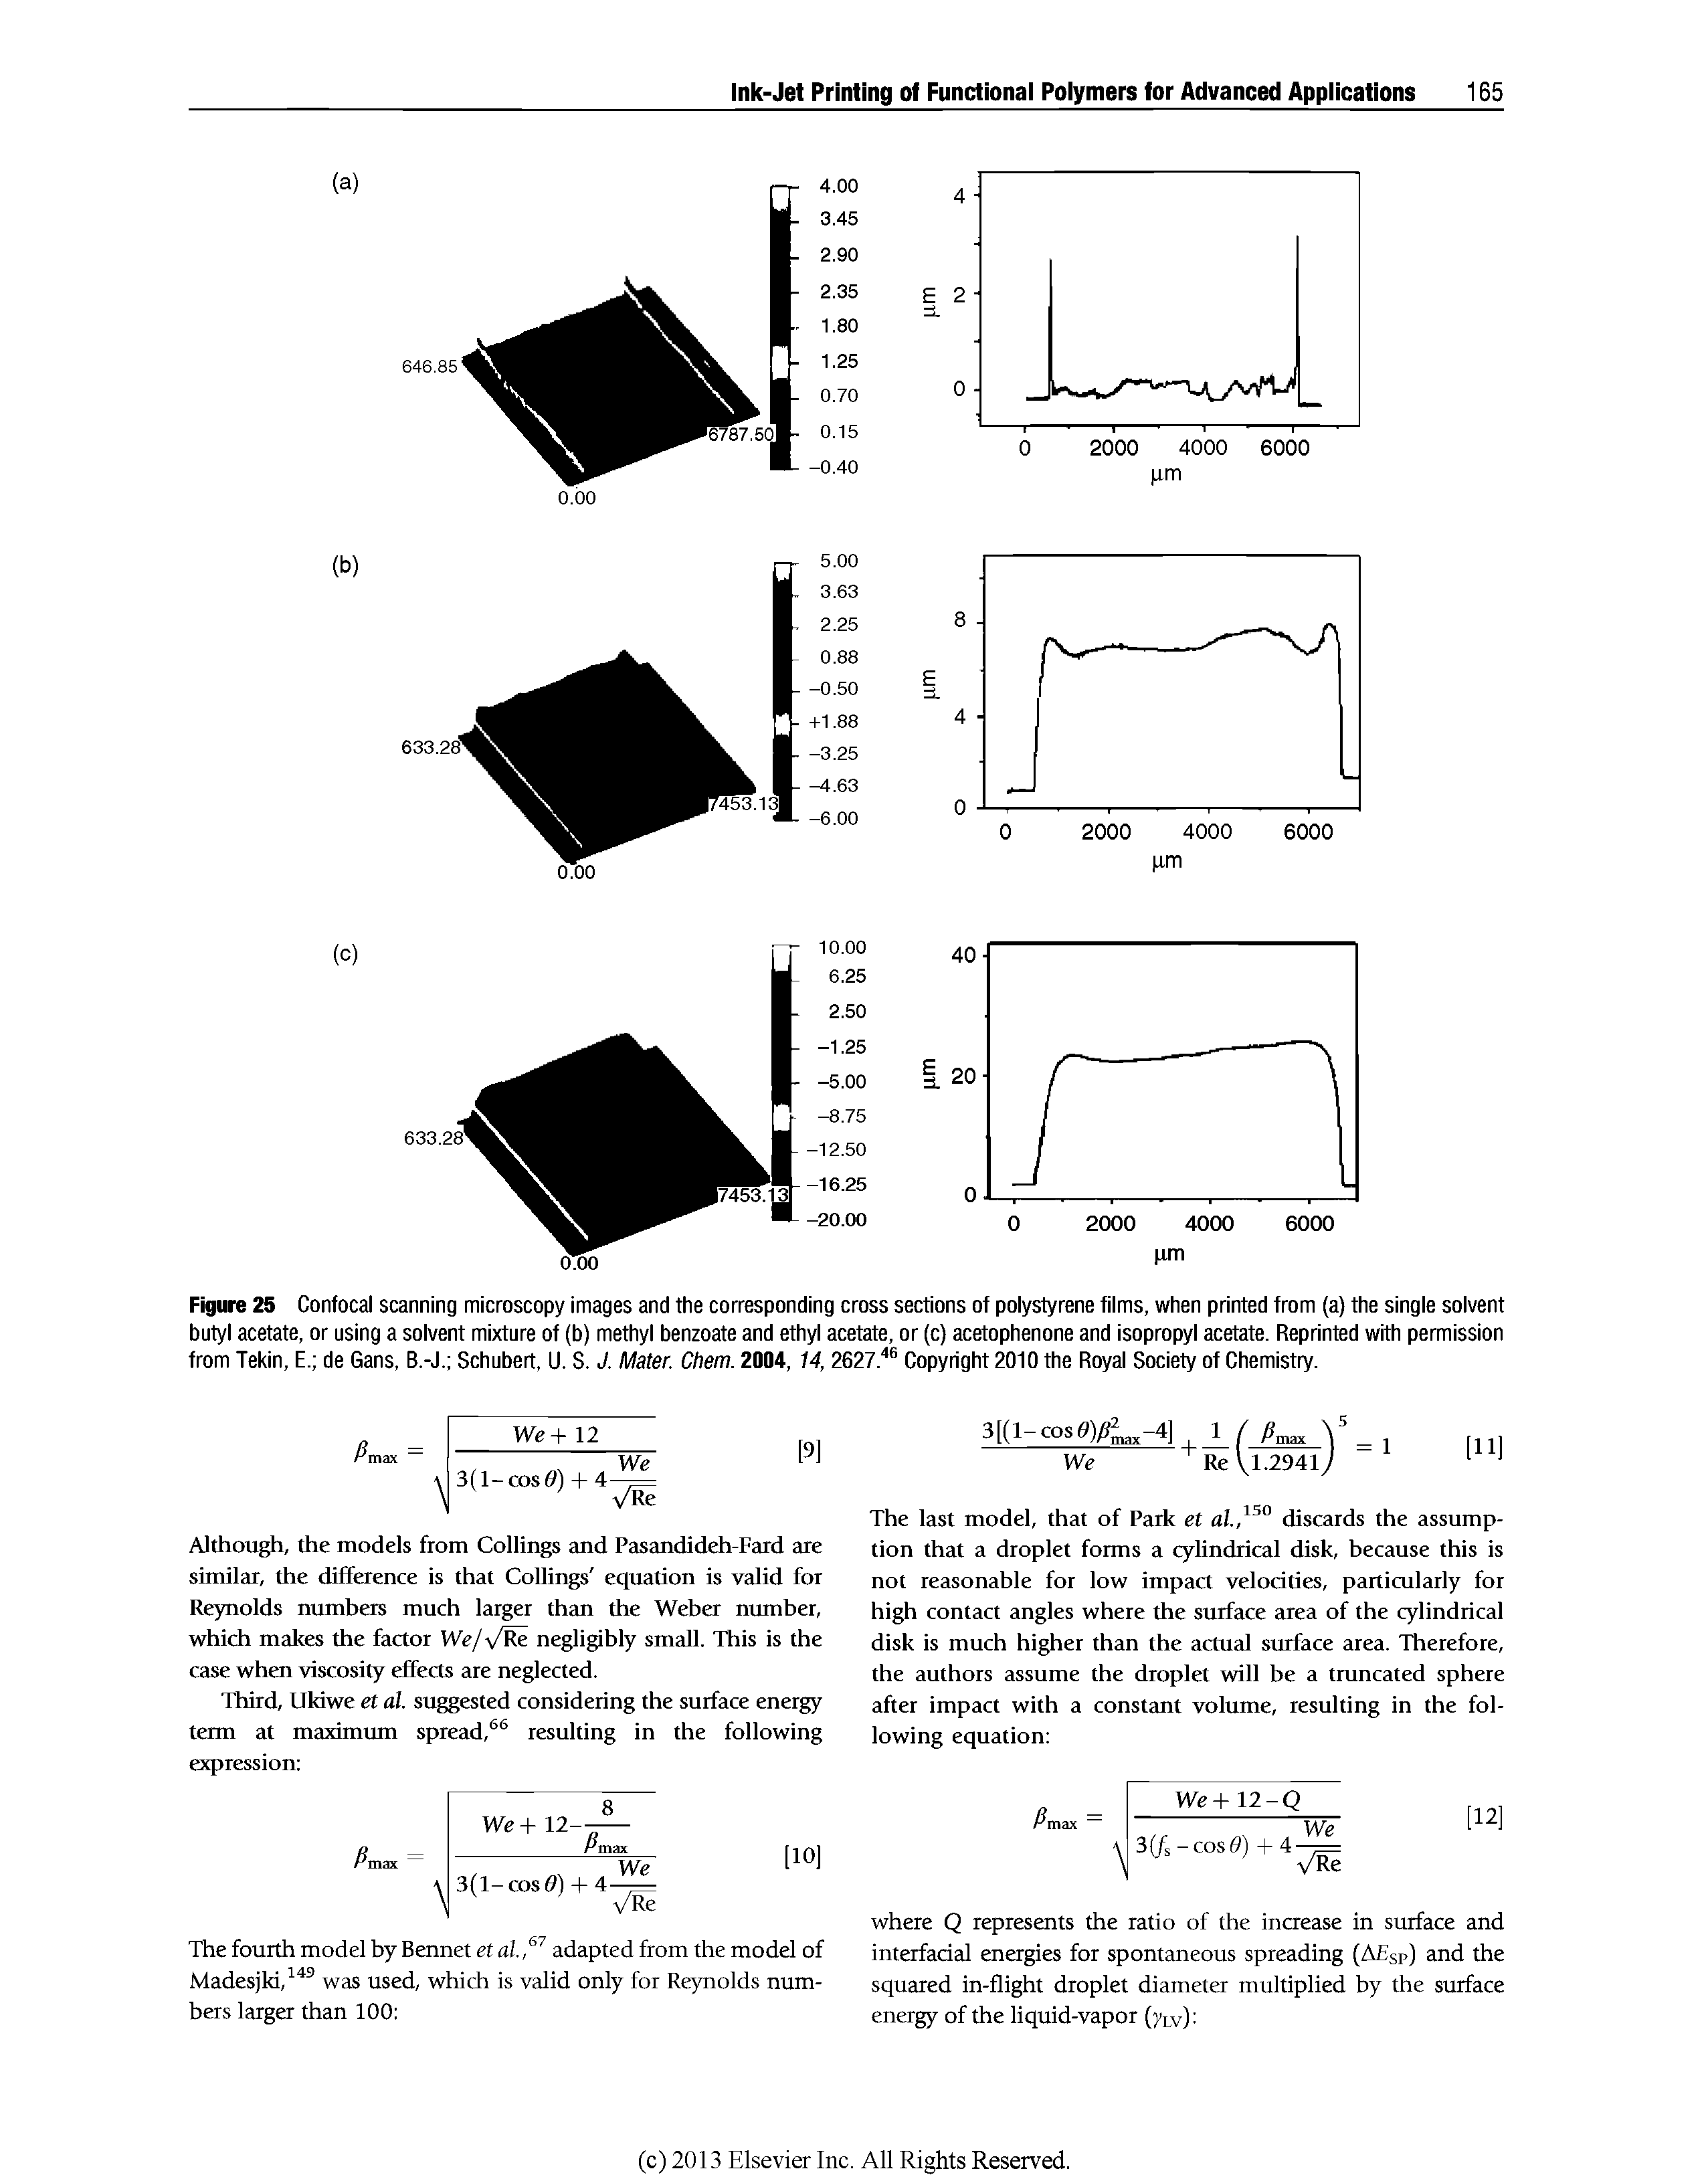 Figure 25 Confocal scanning microscopy images and the corresponding cross sections of polystyrene films, when printed from (a) the single solvent butyl acetate, or using a solvent mixture of (b) methyl benzoate and ethyl acetate, or (c) acetophenone and isopropyl acetate. Reprinted with permission from Tekin, E. de Gans, B.-J. Schubert, U. S. J. Mater. Chem. 2004,14,2627. Copyright 2010 the Royal Society of Chemistry.